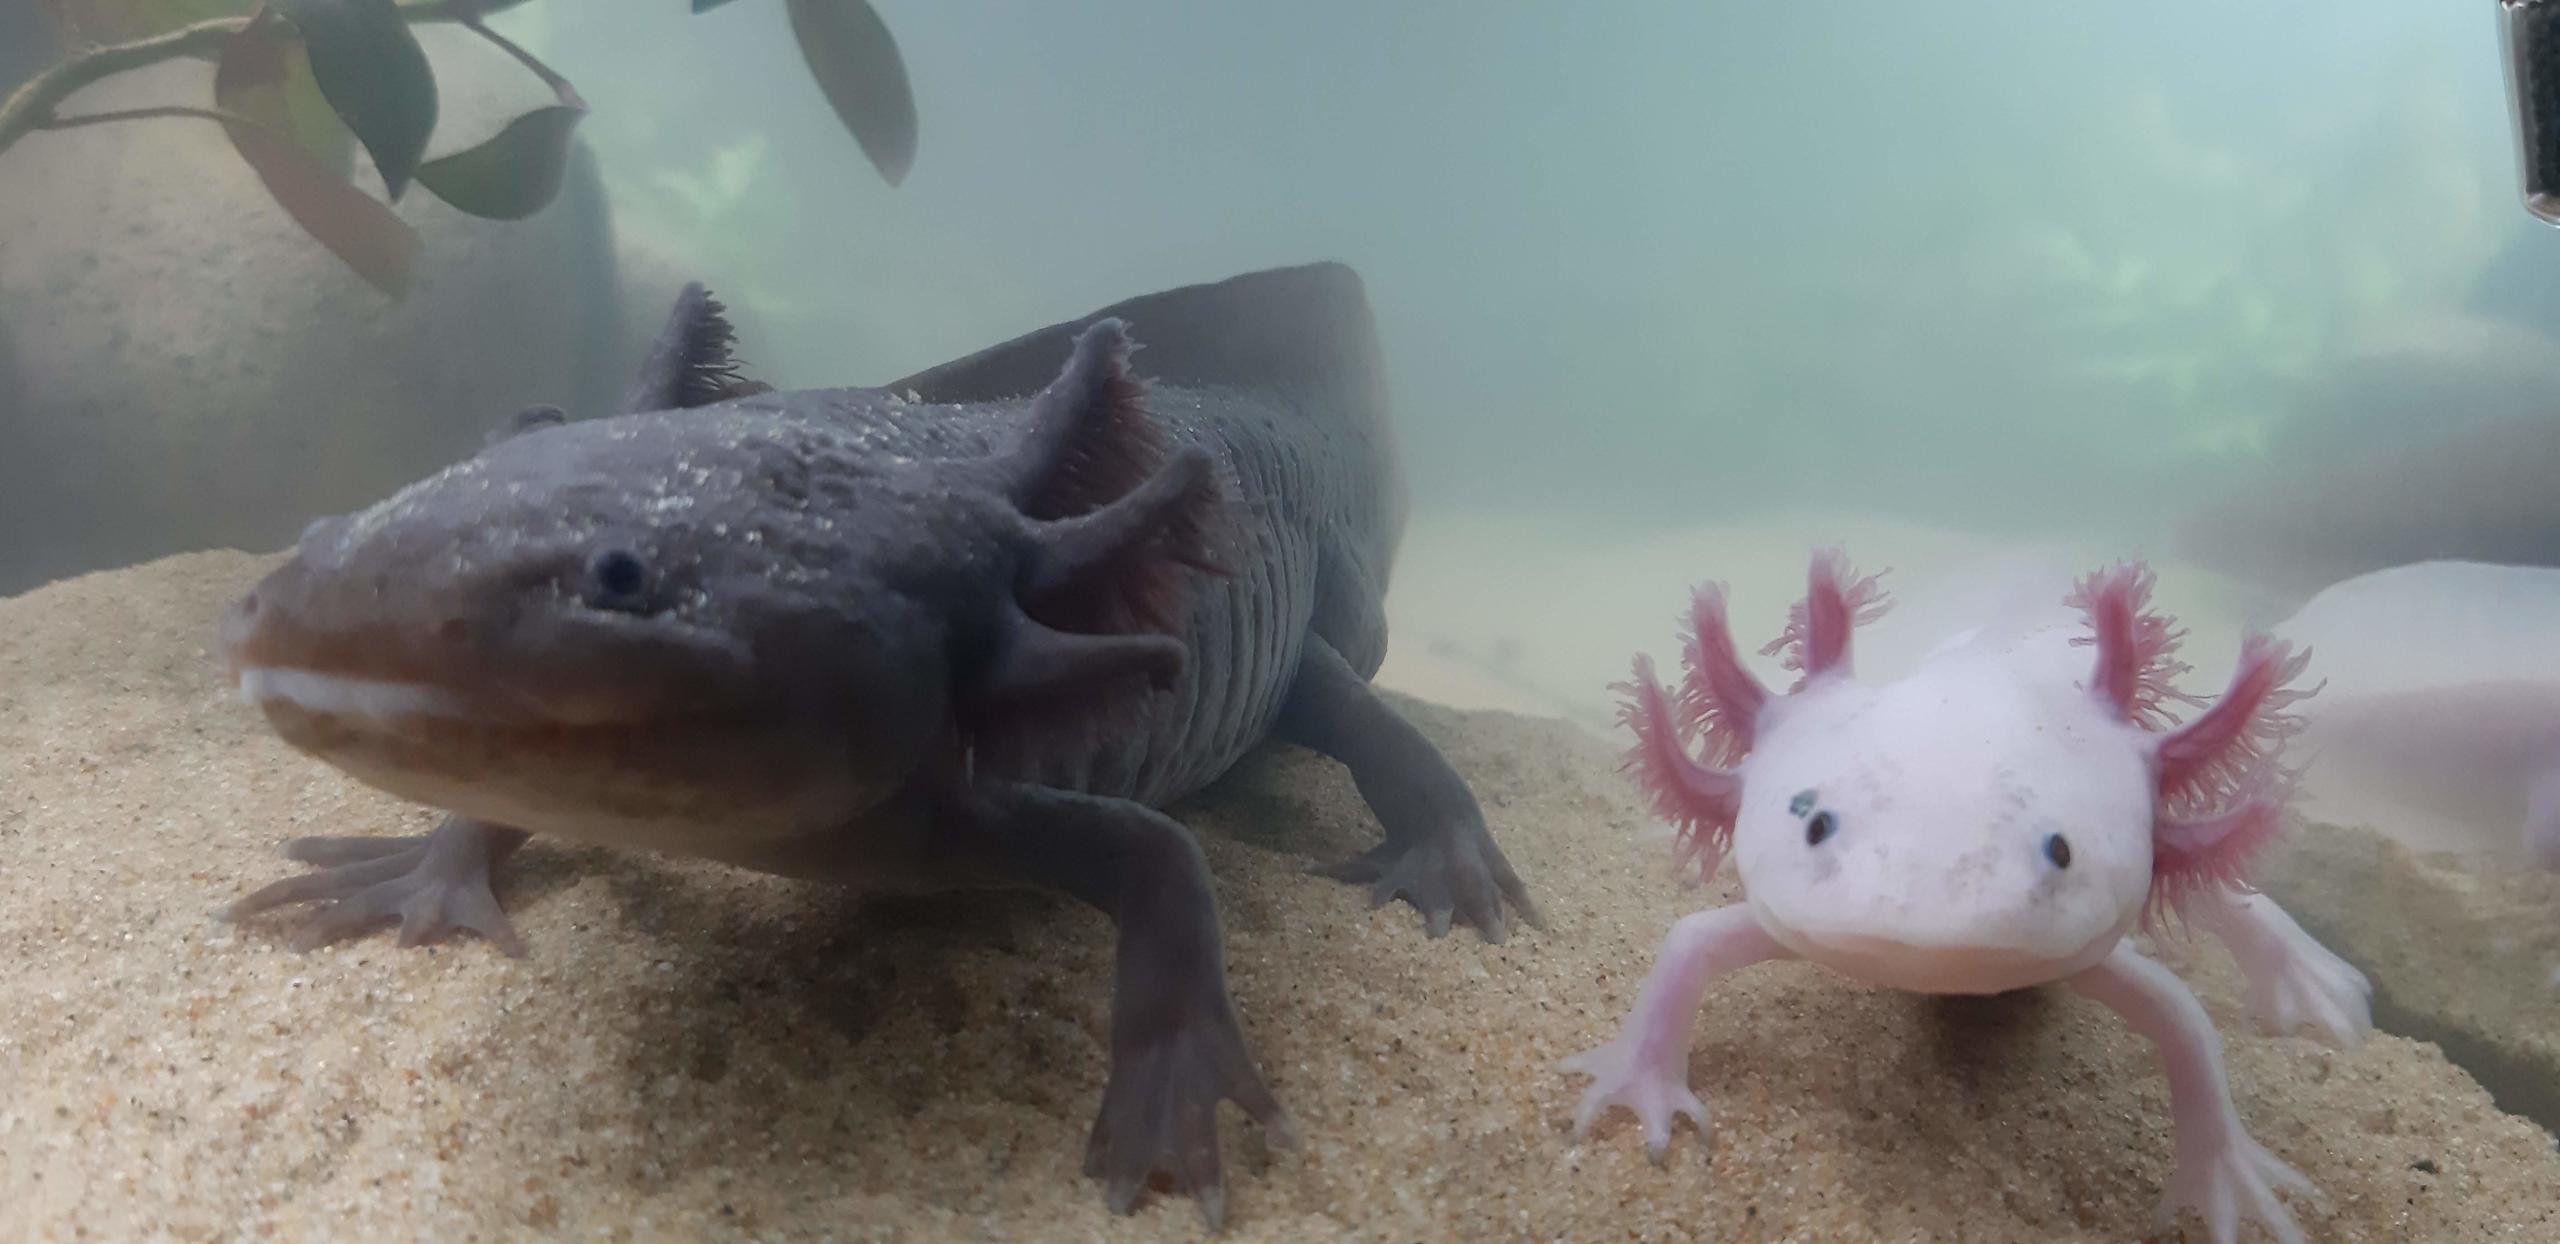 Illness Sickness Young Axolotl Died Of Fungus Infection Caudata Org Newts And Salamanders Portal